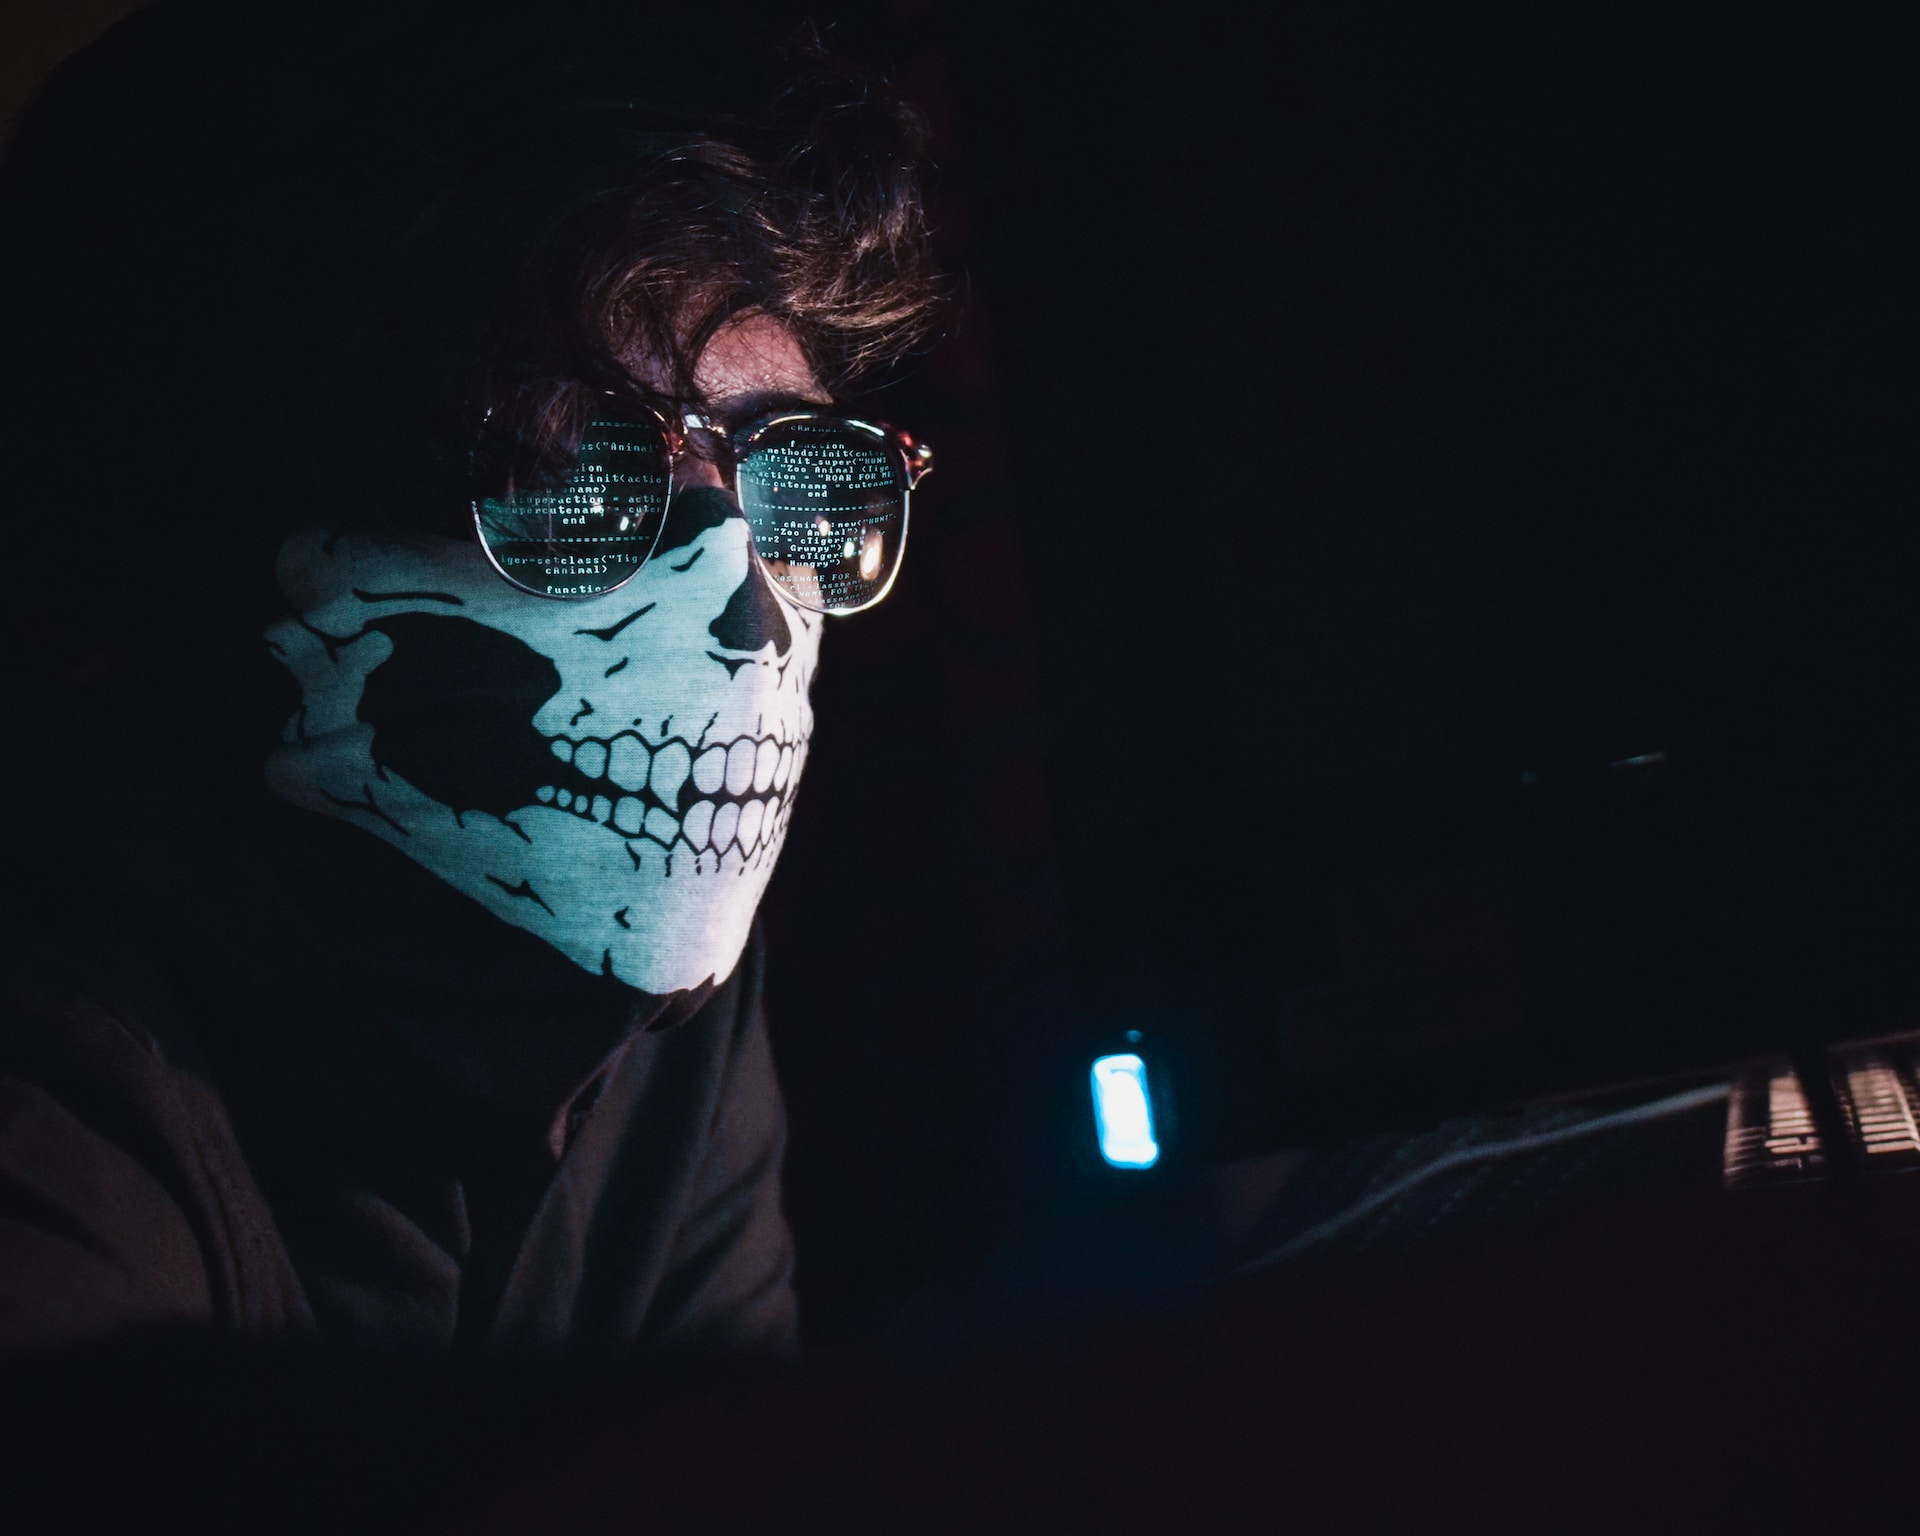 Man wearing a skull mask and working on website security